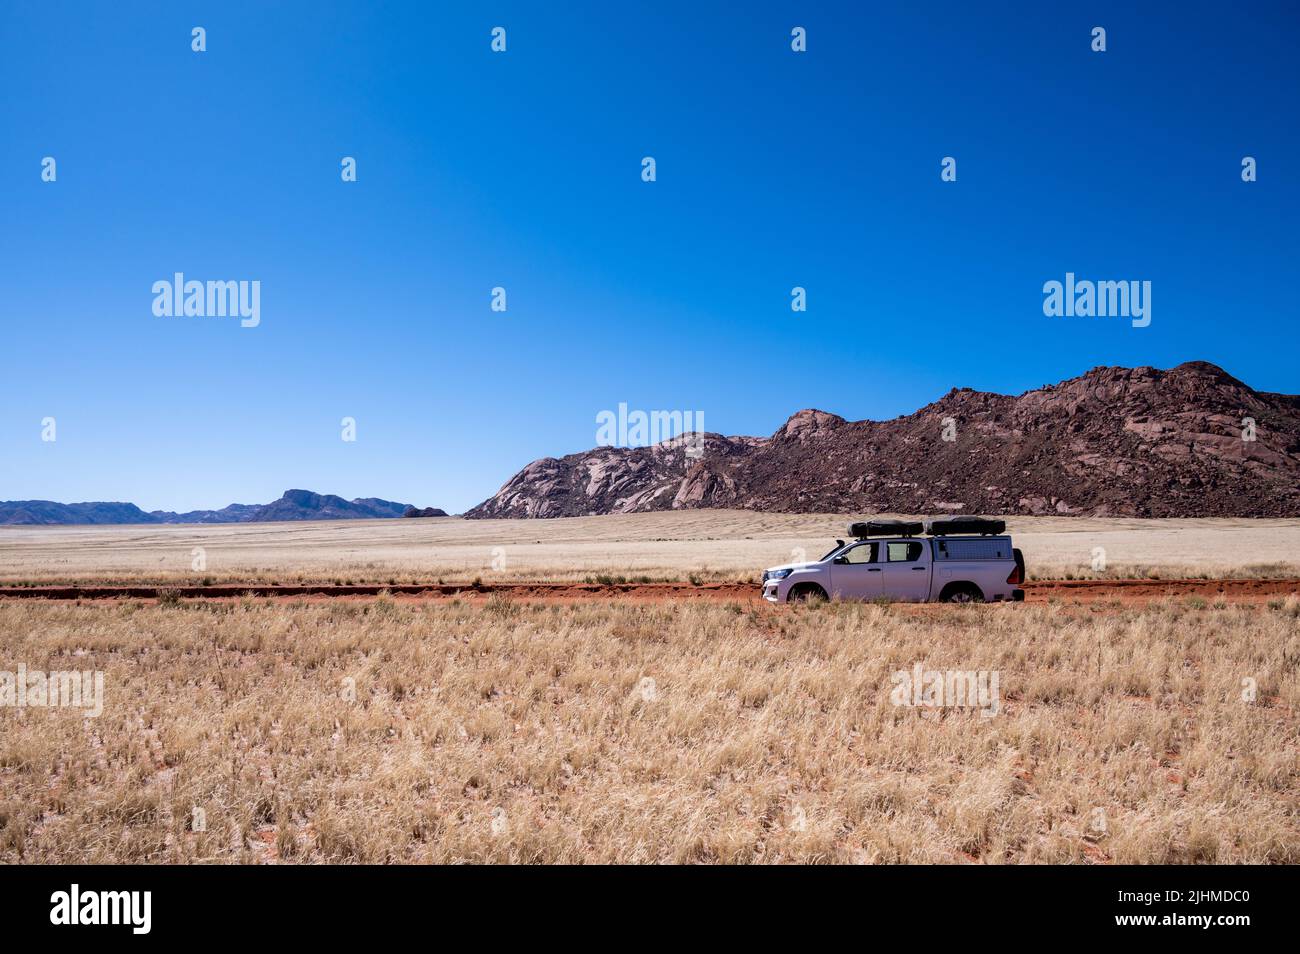 A 4x4 on a gravel road in Namibia Africa Stock Photo